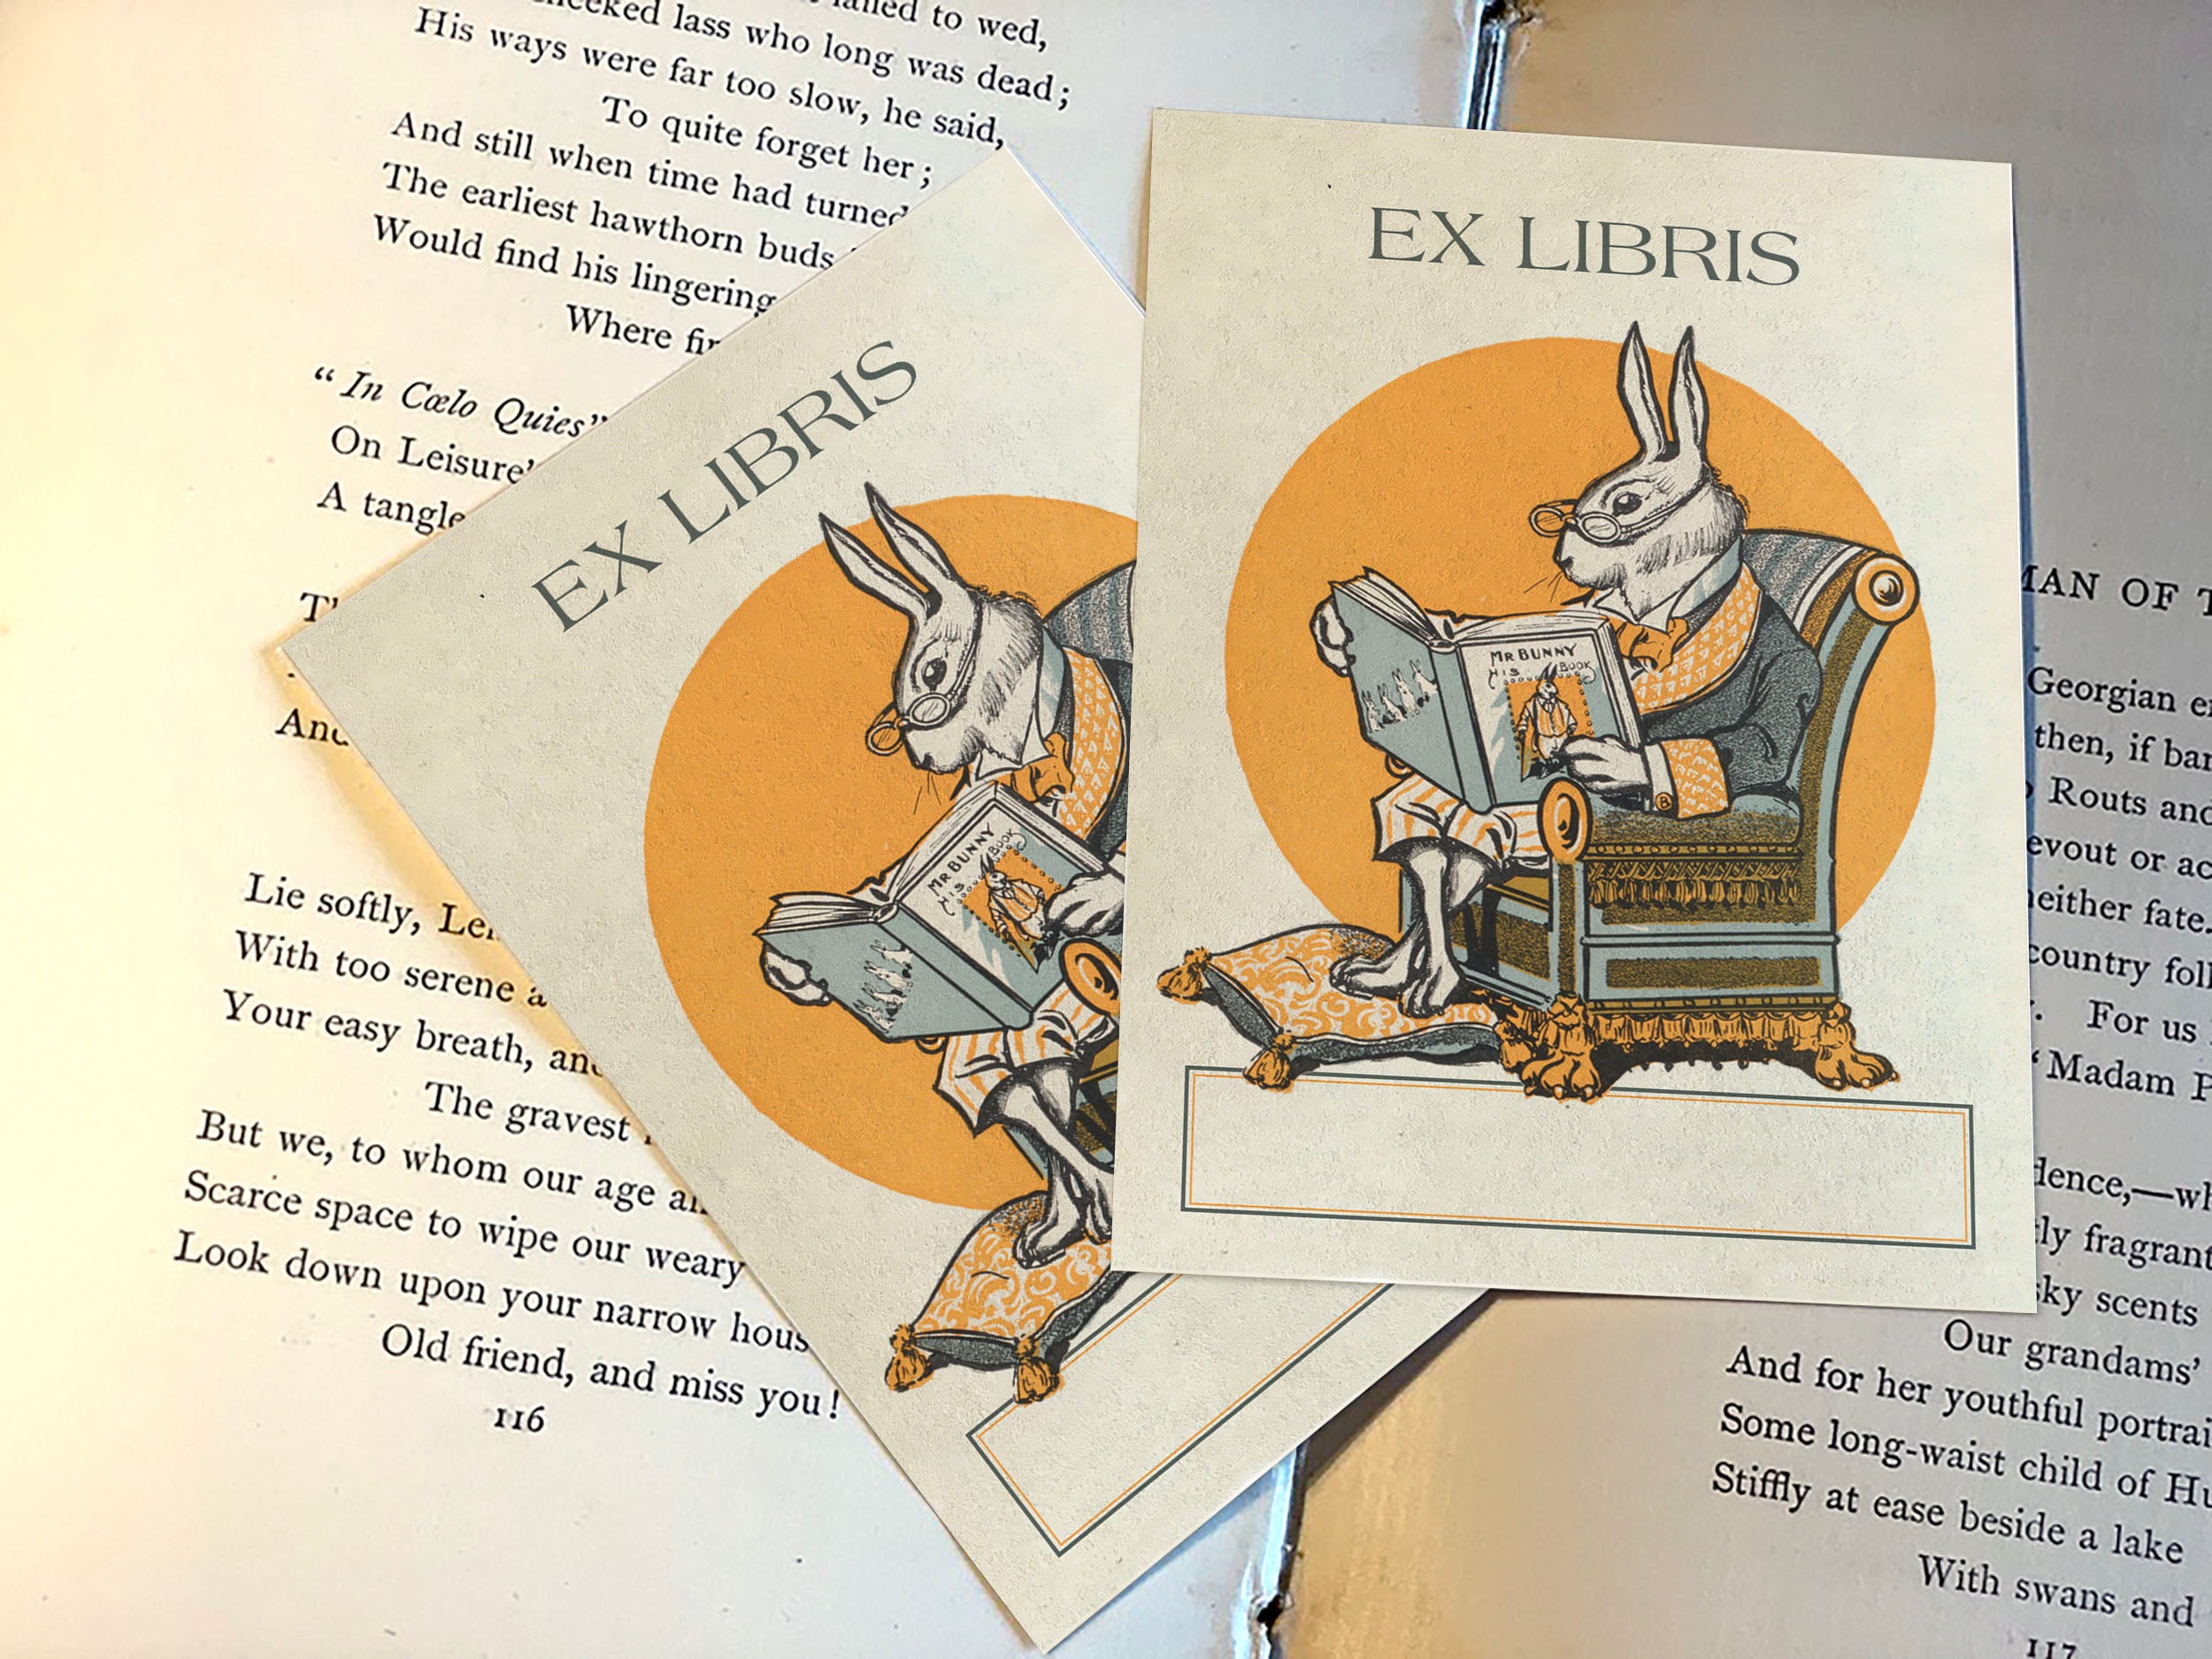 Mr Bunny, Personalized Ex-Libris Bookplates, Crafted on Traditional Gummed Paper, 3in x 4in, Set of 30